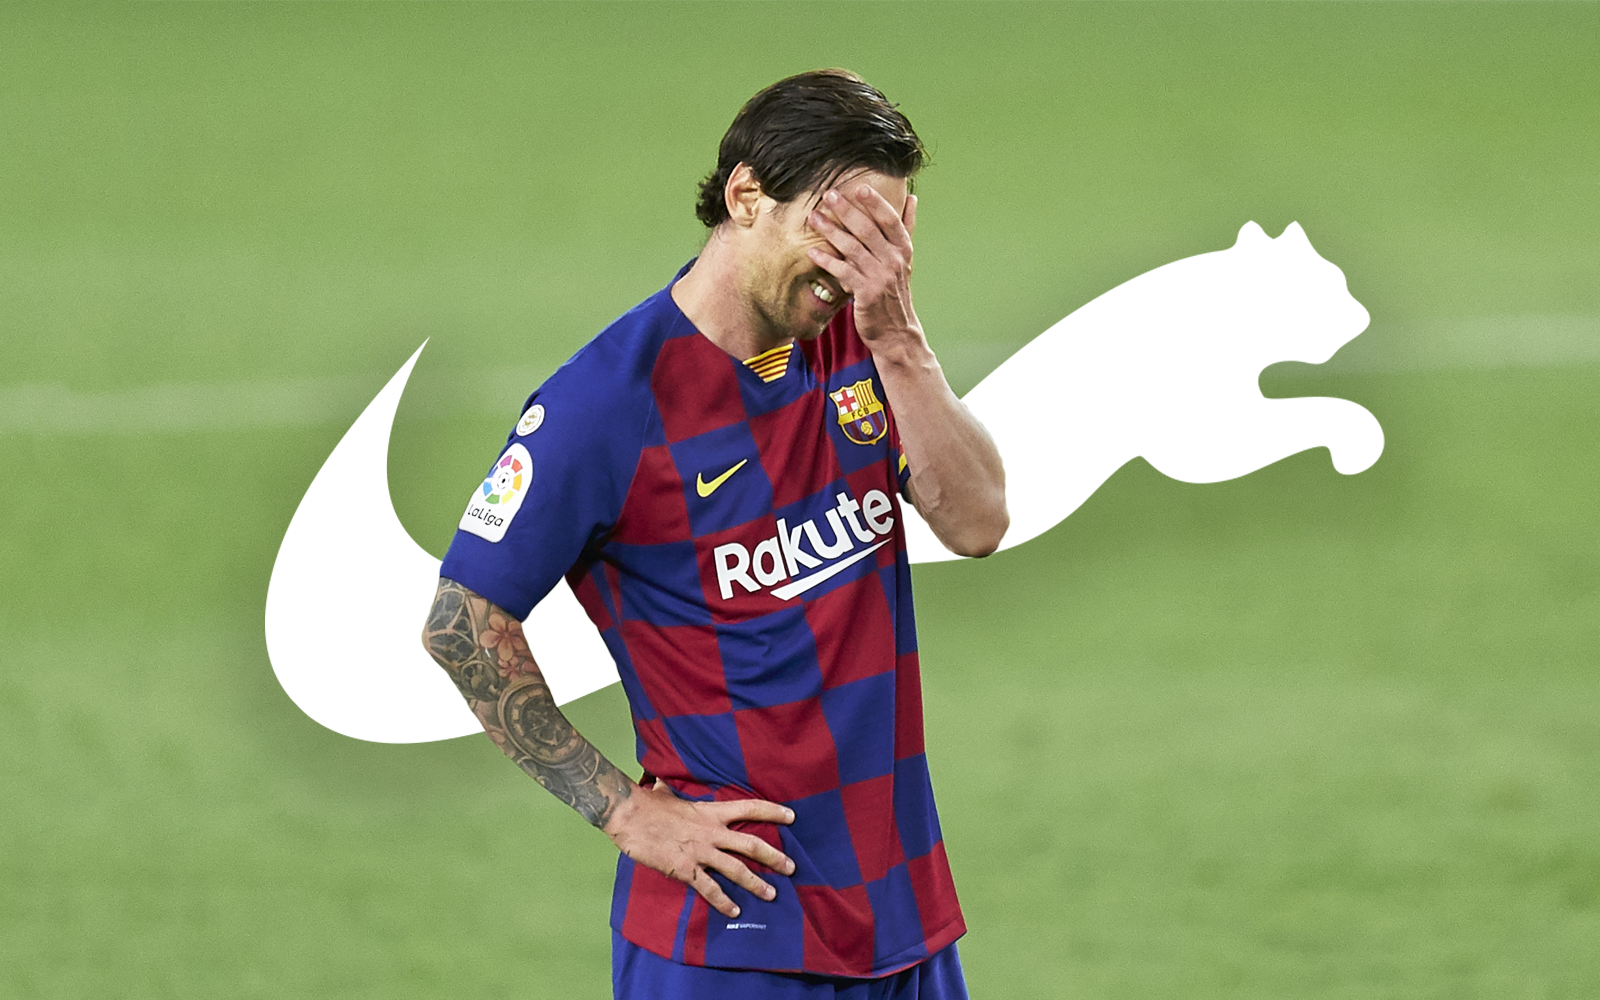 Are Barcelona FC really to leave Nike?